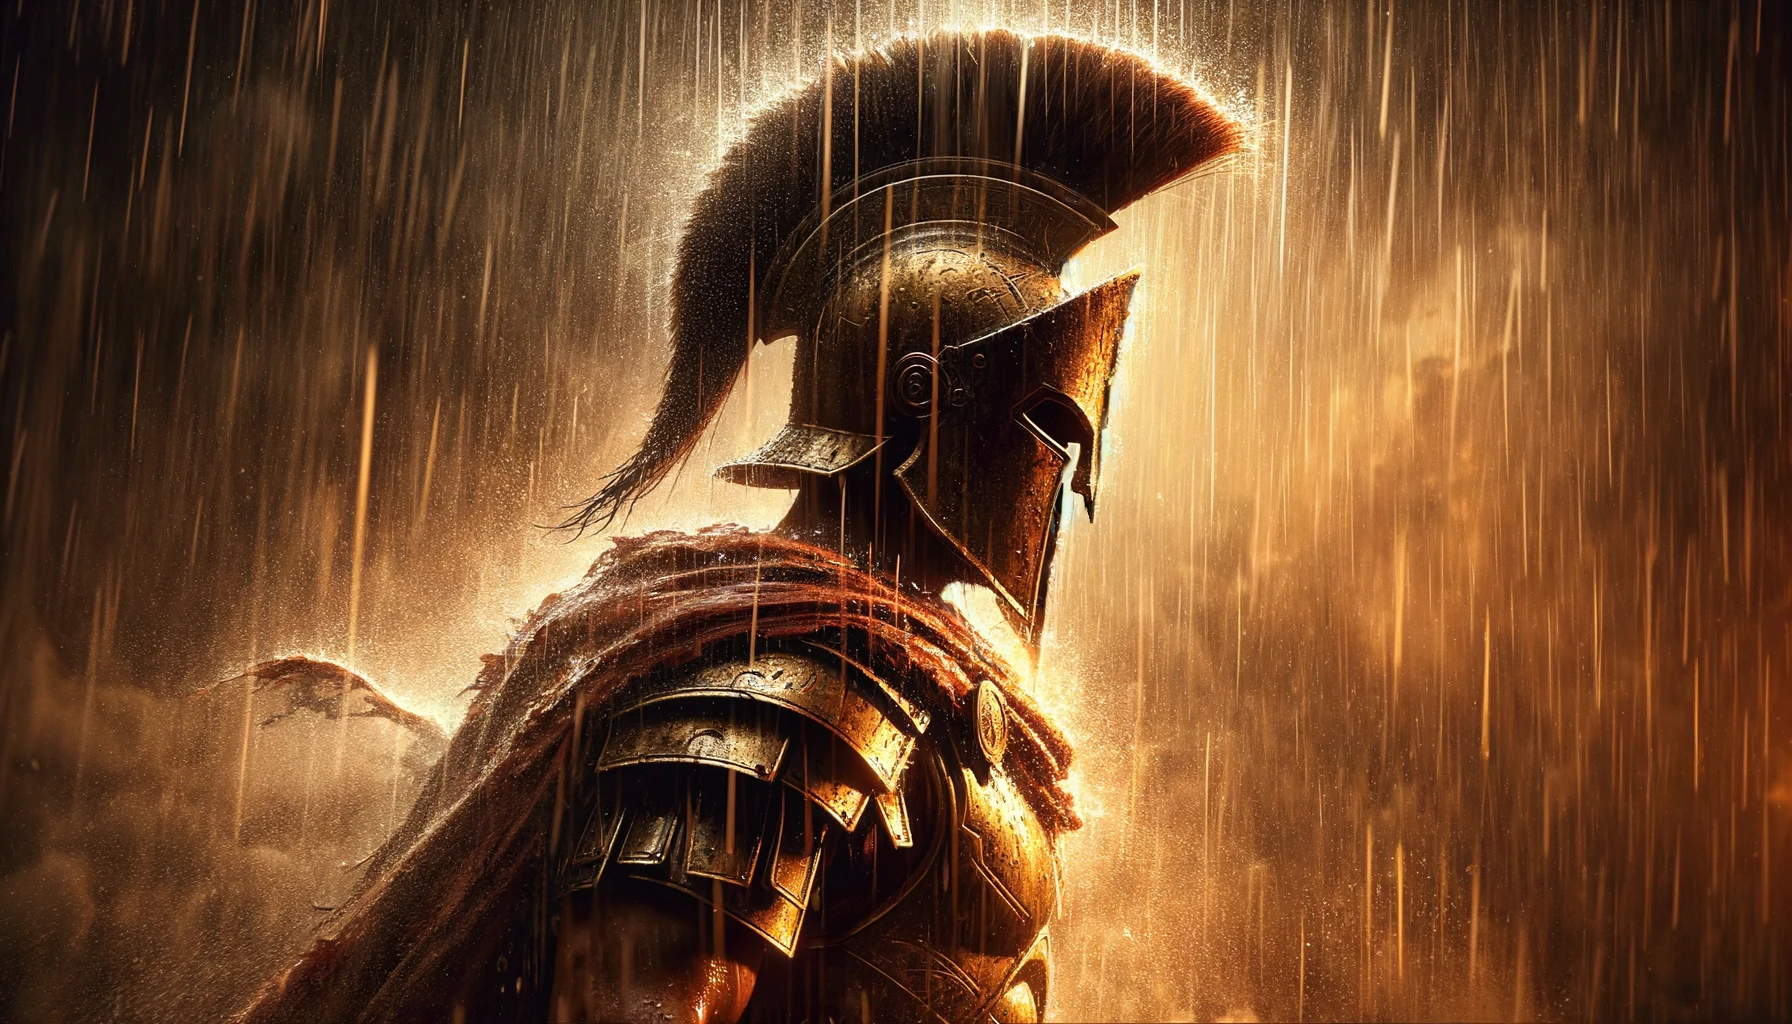 DALL·E 2023-12-07 13.26.06 - Recreate the provided image of a Spartan warrior in the rain in a 16 9 aspect ratio, focusing on the warrior's upper body. The image should have the s